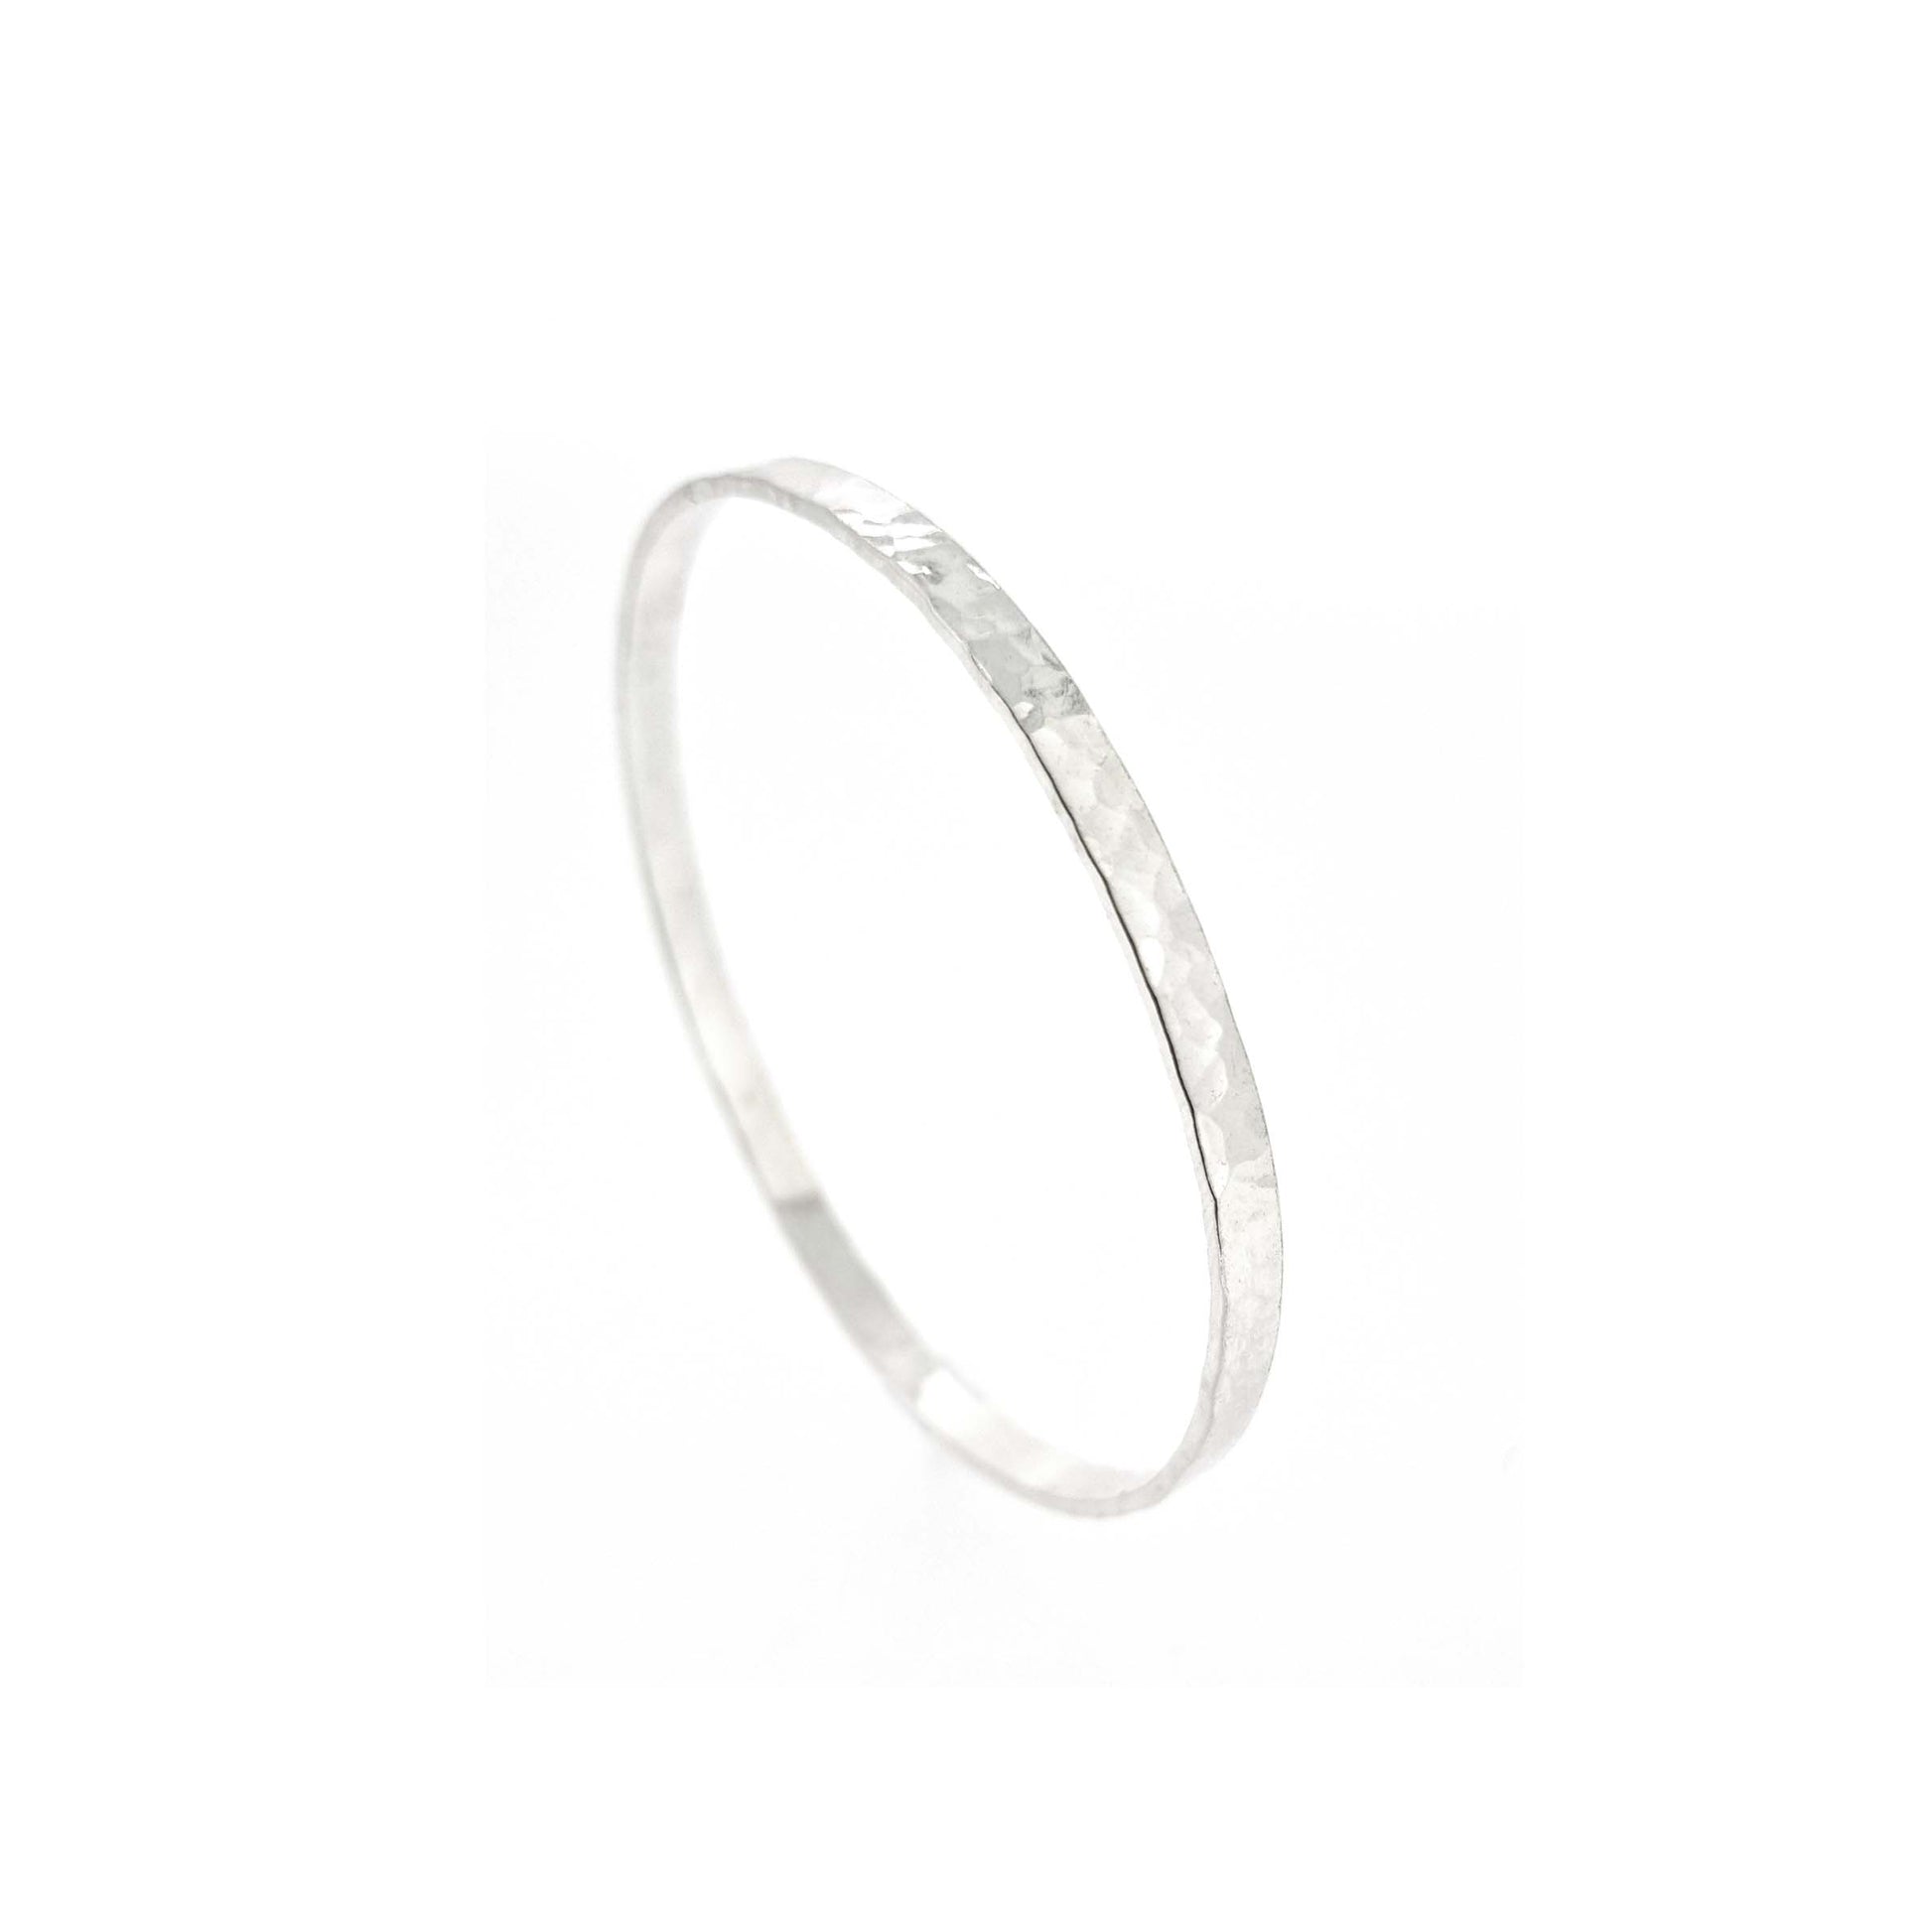 Silver round 4mm wide flat hammered bangle